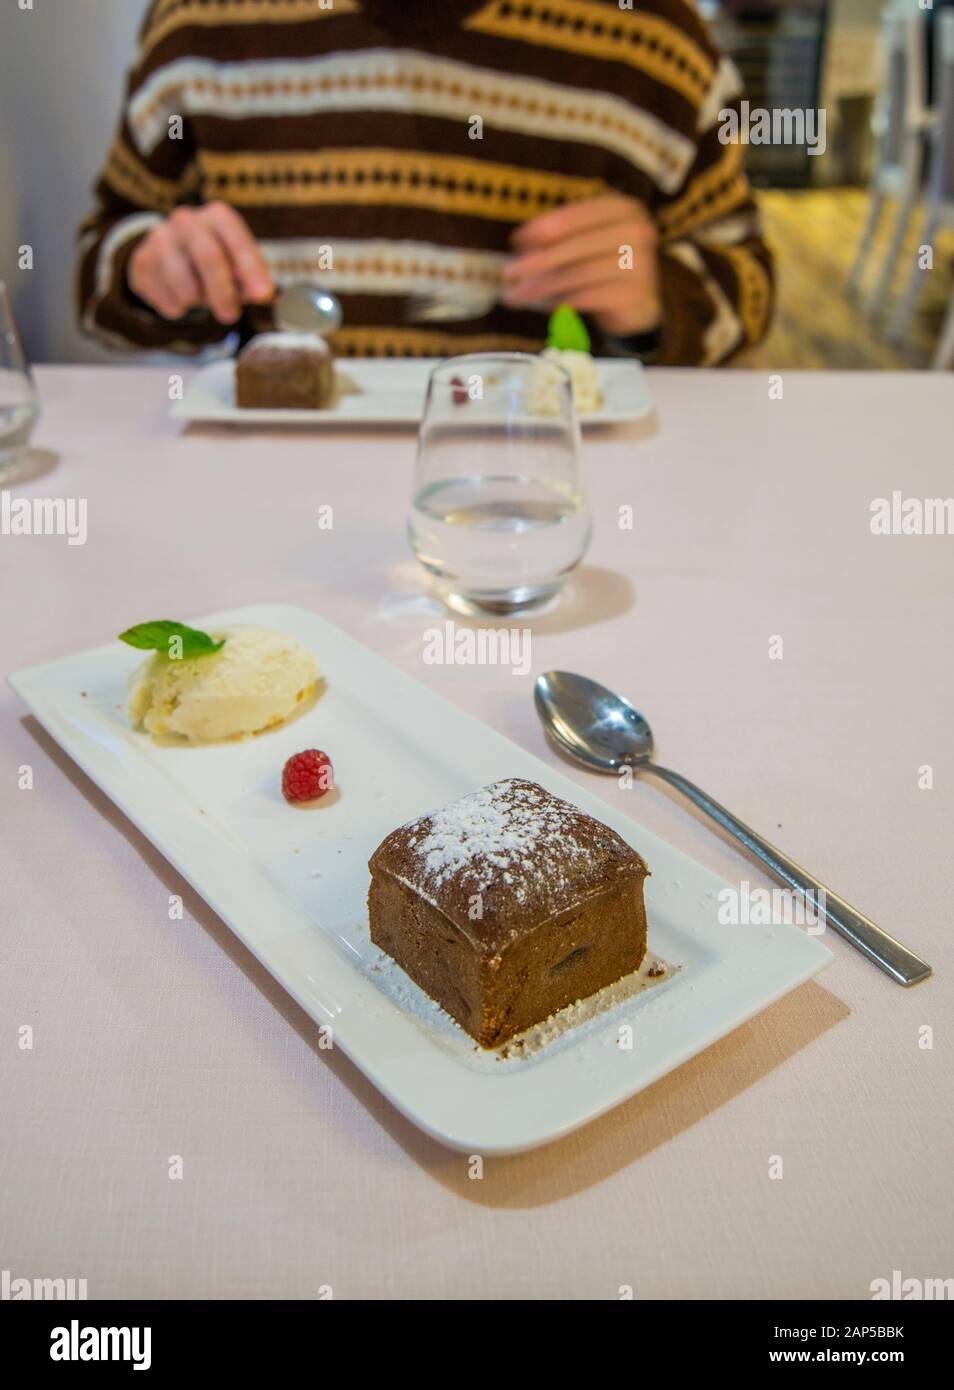 Chocolate cake in a restaurant. Stock Photo